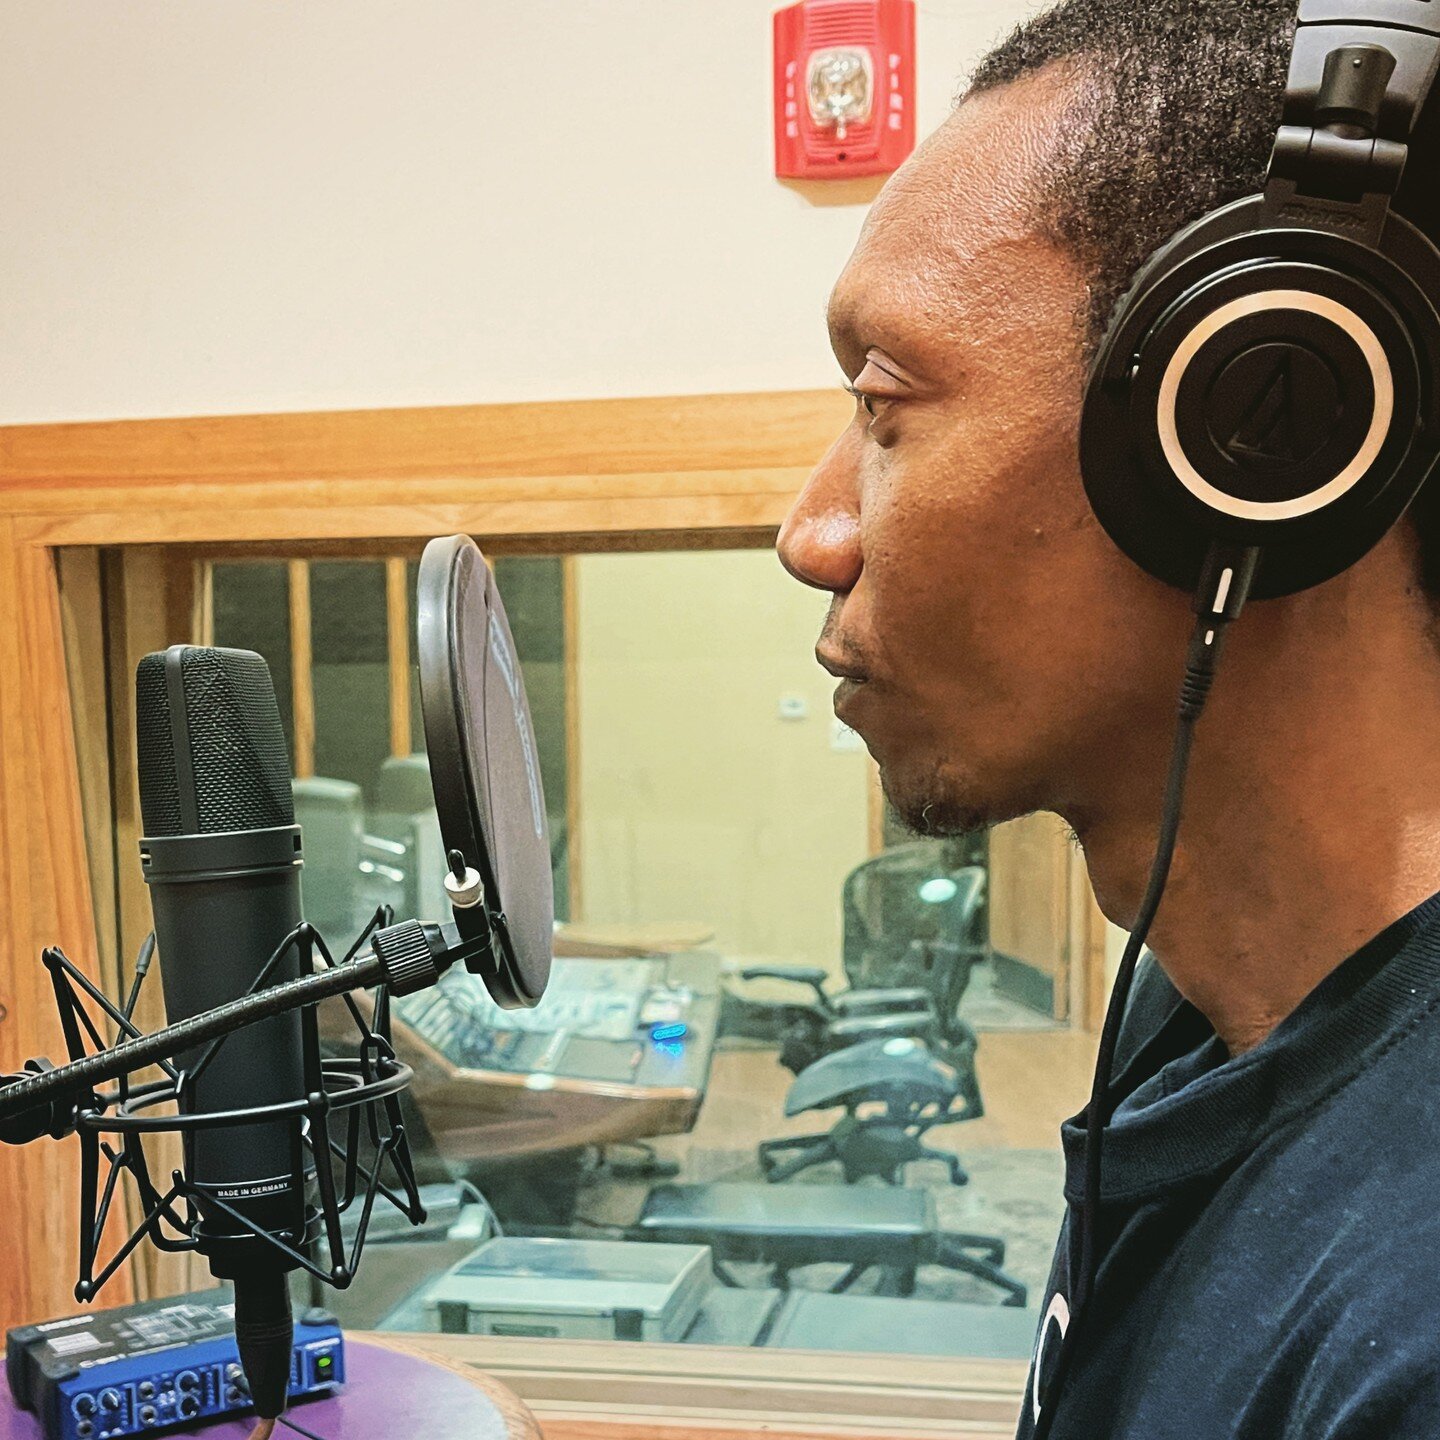 Earlier this summer, gospel rapper John Knox was in recording new songs for his next release. Moving and inspiring lyrics, smooth melodies. Honored to have worked with you John!